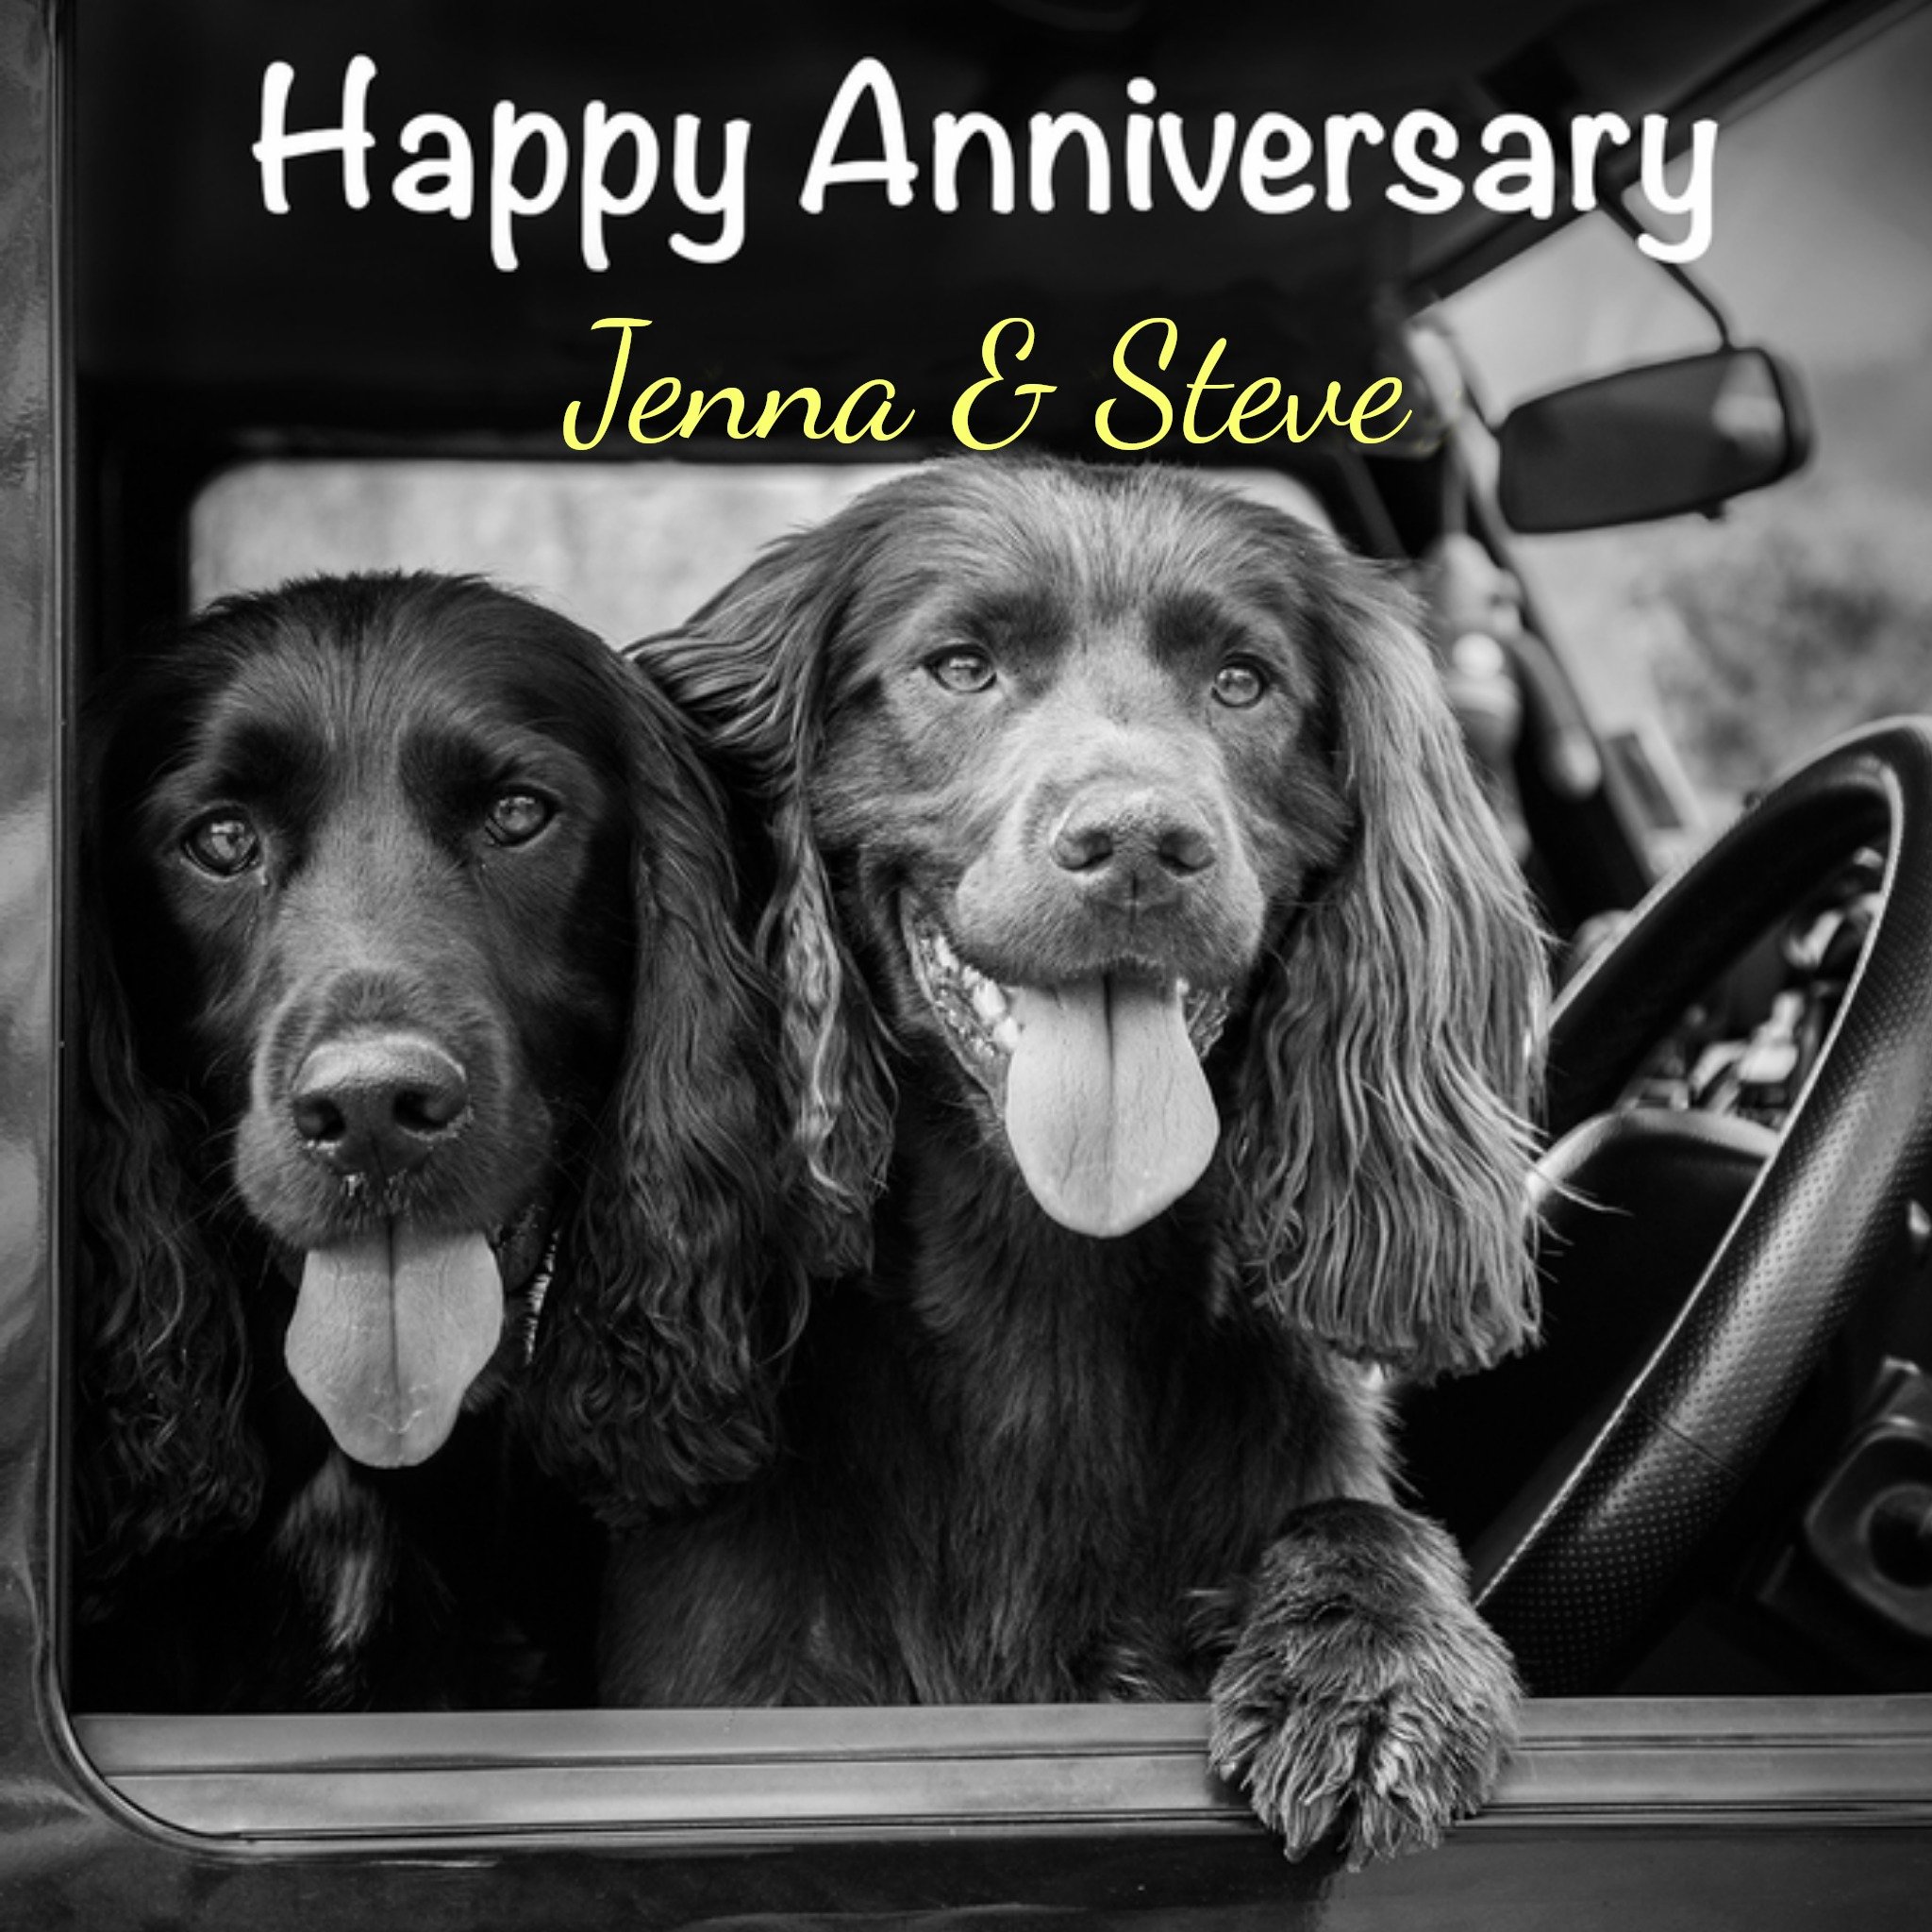 Moonpig Alex Sharp Photogrpahy Two Spaniel Dogs In A Car Happy Anniversary Card, Large